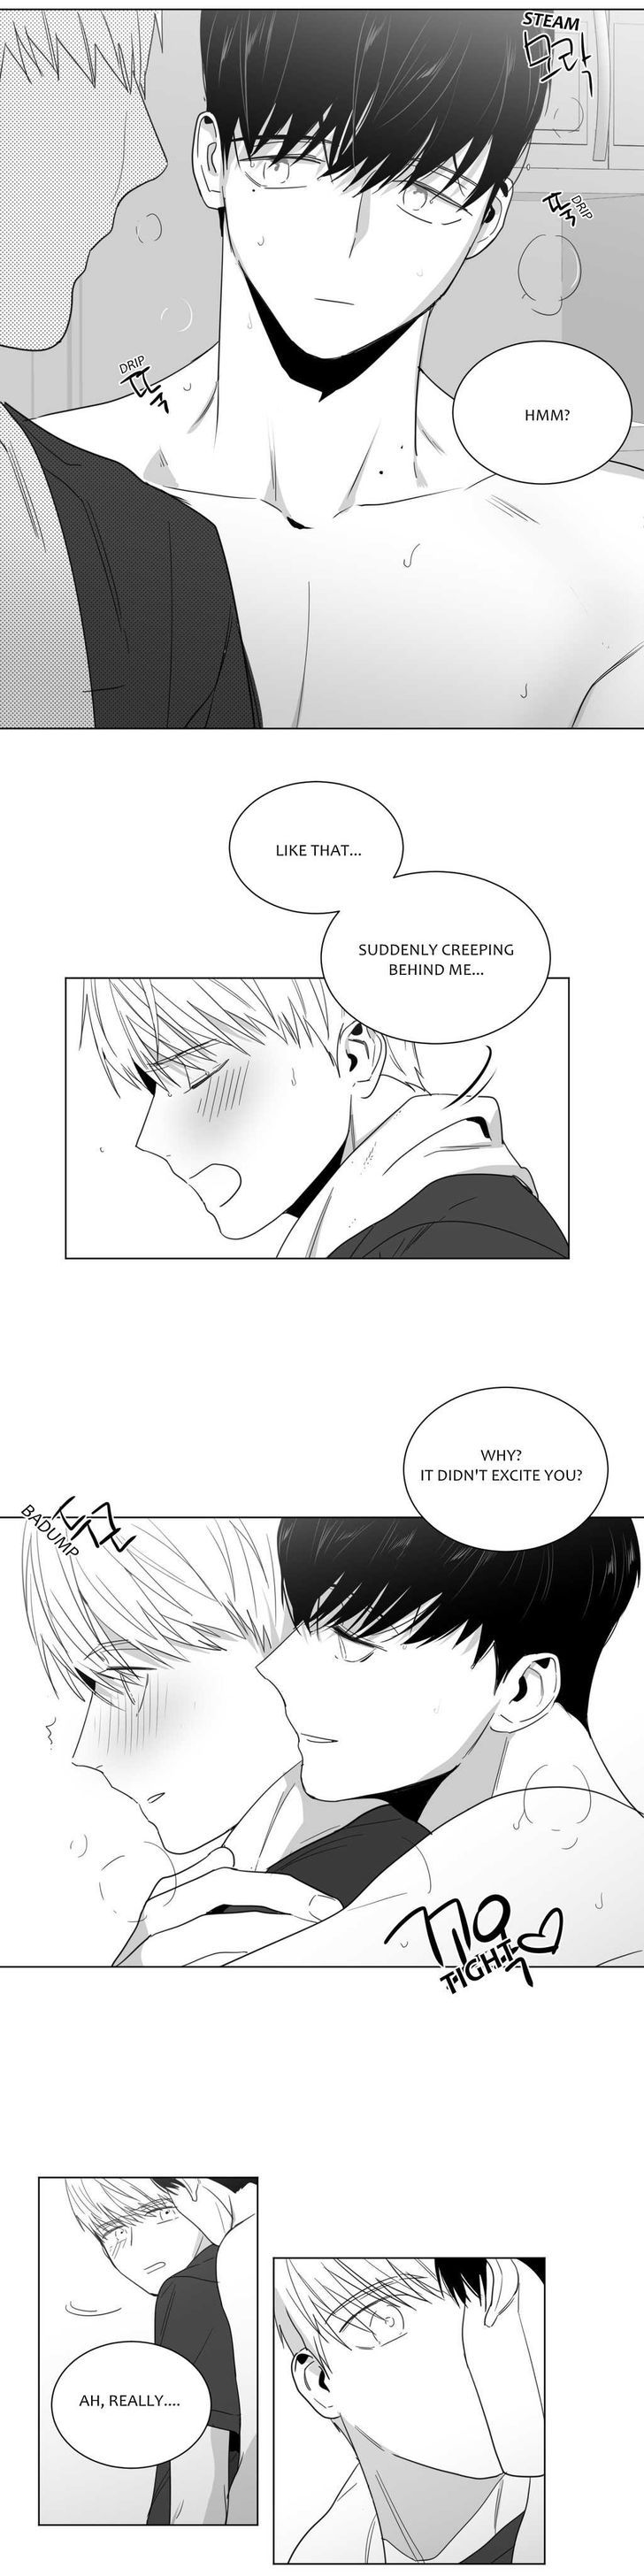 Lover Boy (Lezhin) Chapter 015 page 4